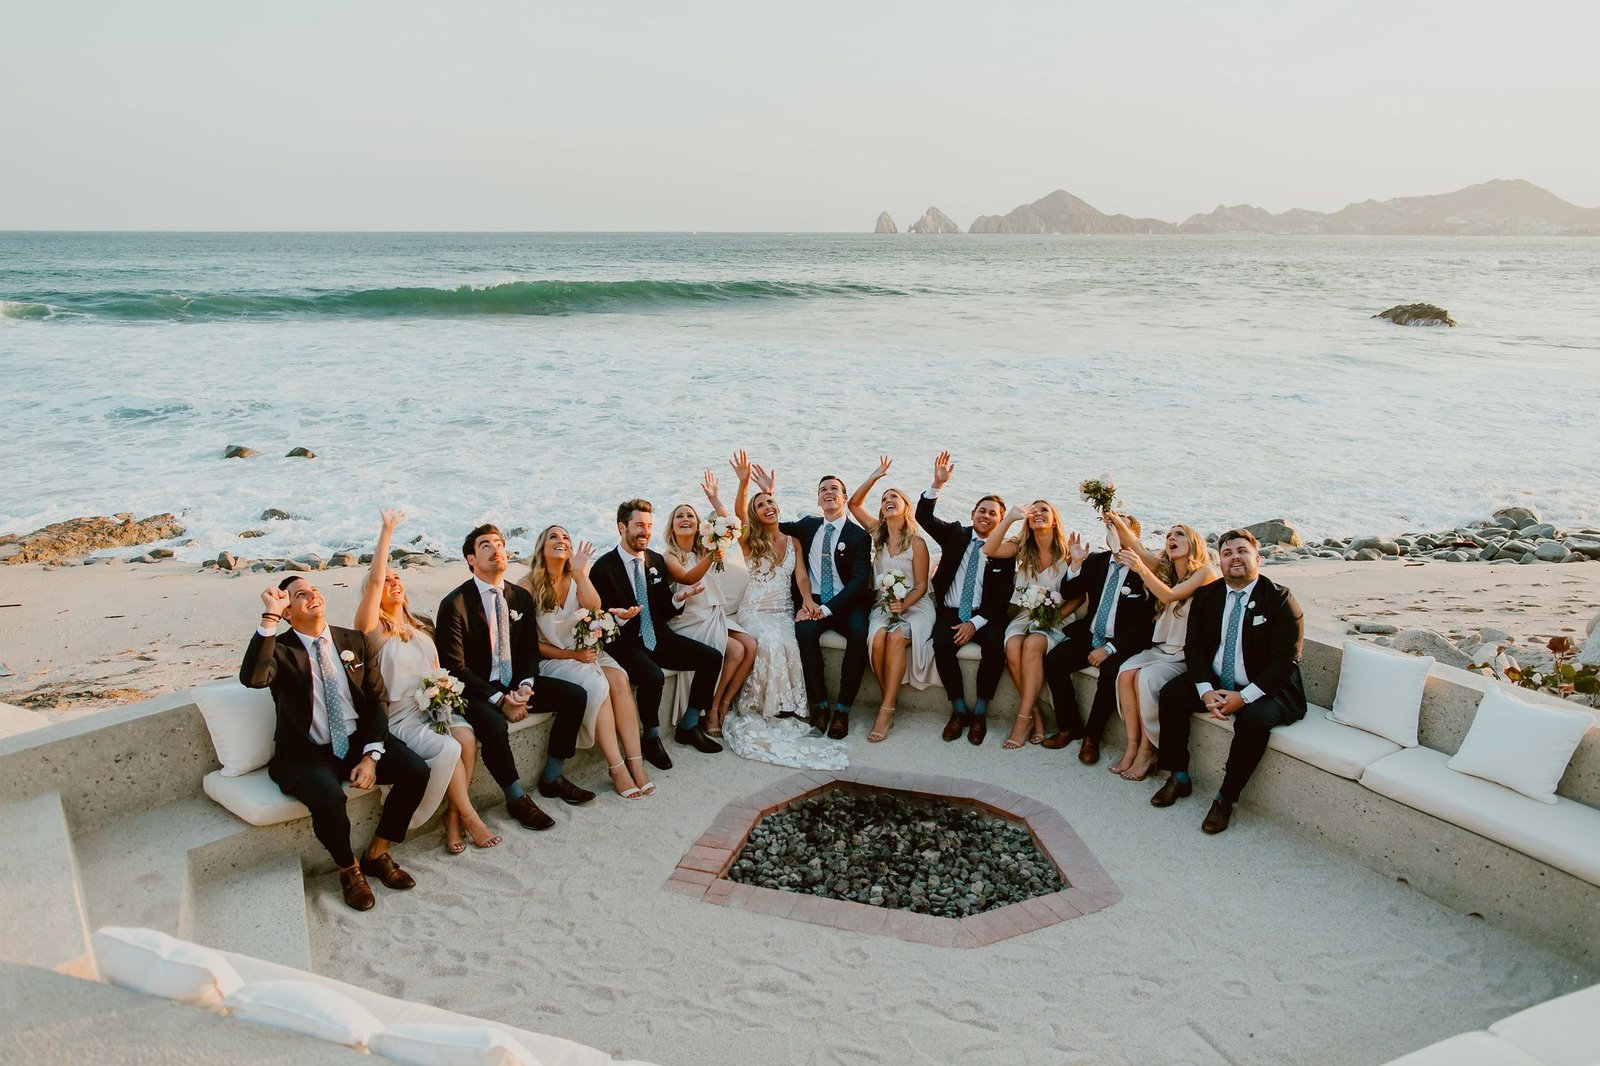 Photo Session with the Bride and Groom at the fire pit on the Beach at The Cape Hotel in Cabo San Lucas Mexico. The famous Arch behind them as well as the Sea of Cortez made everything perfect. The waves also looked amazing.